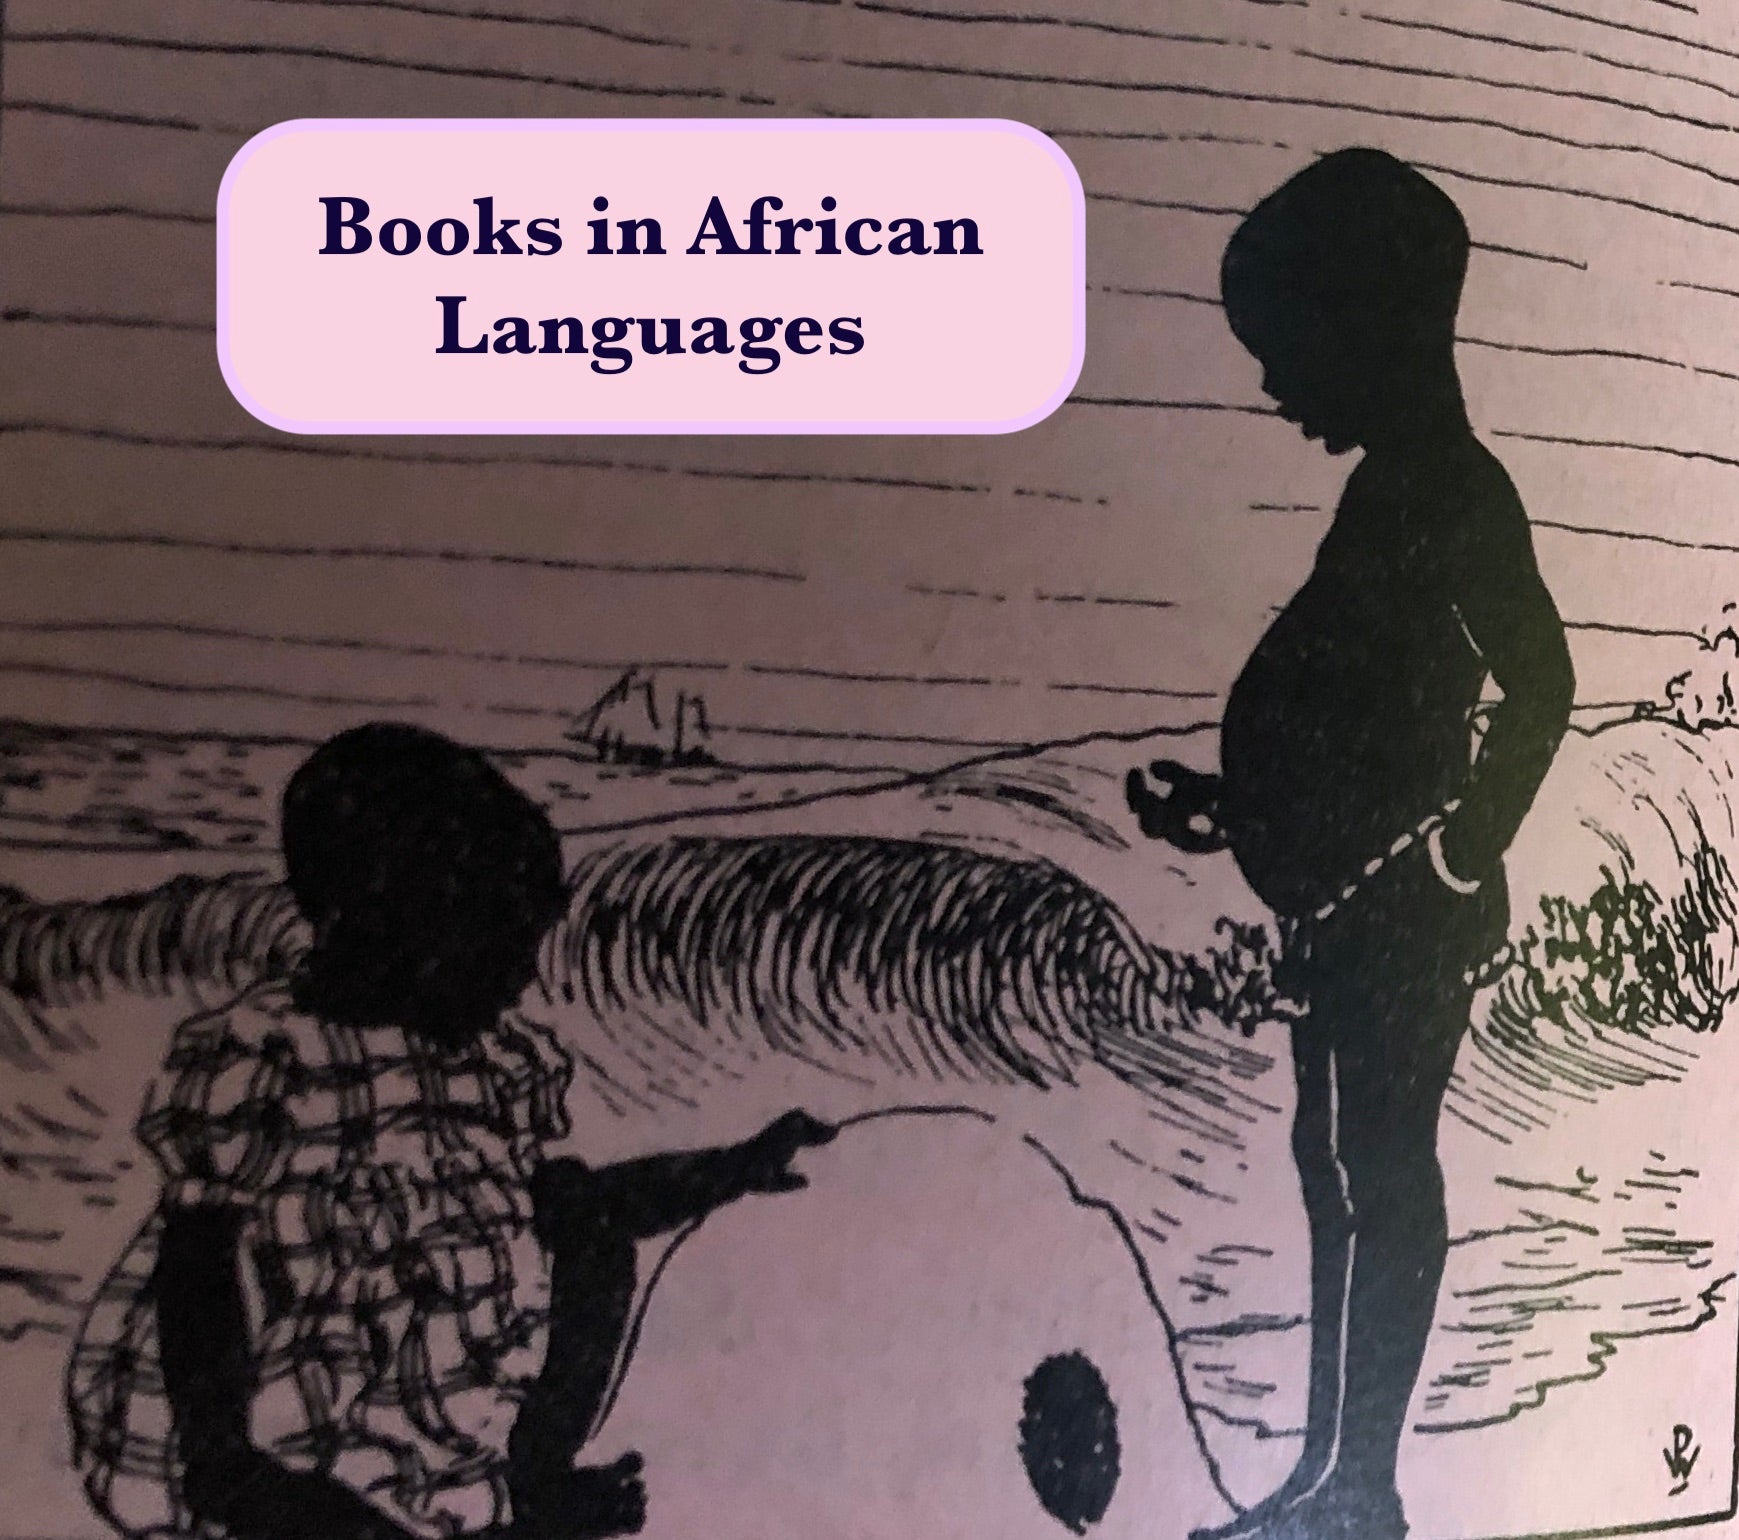 List of Books in African Languages